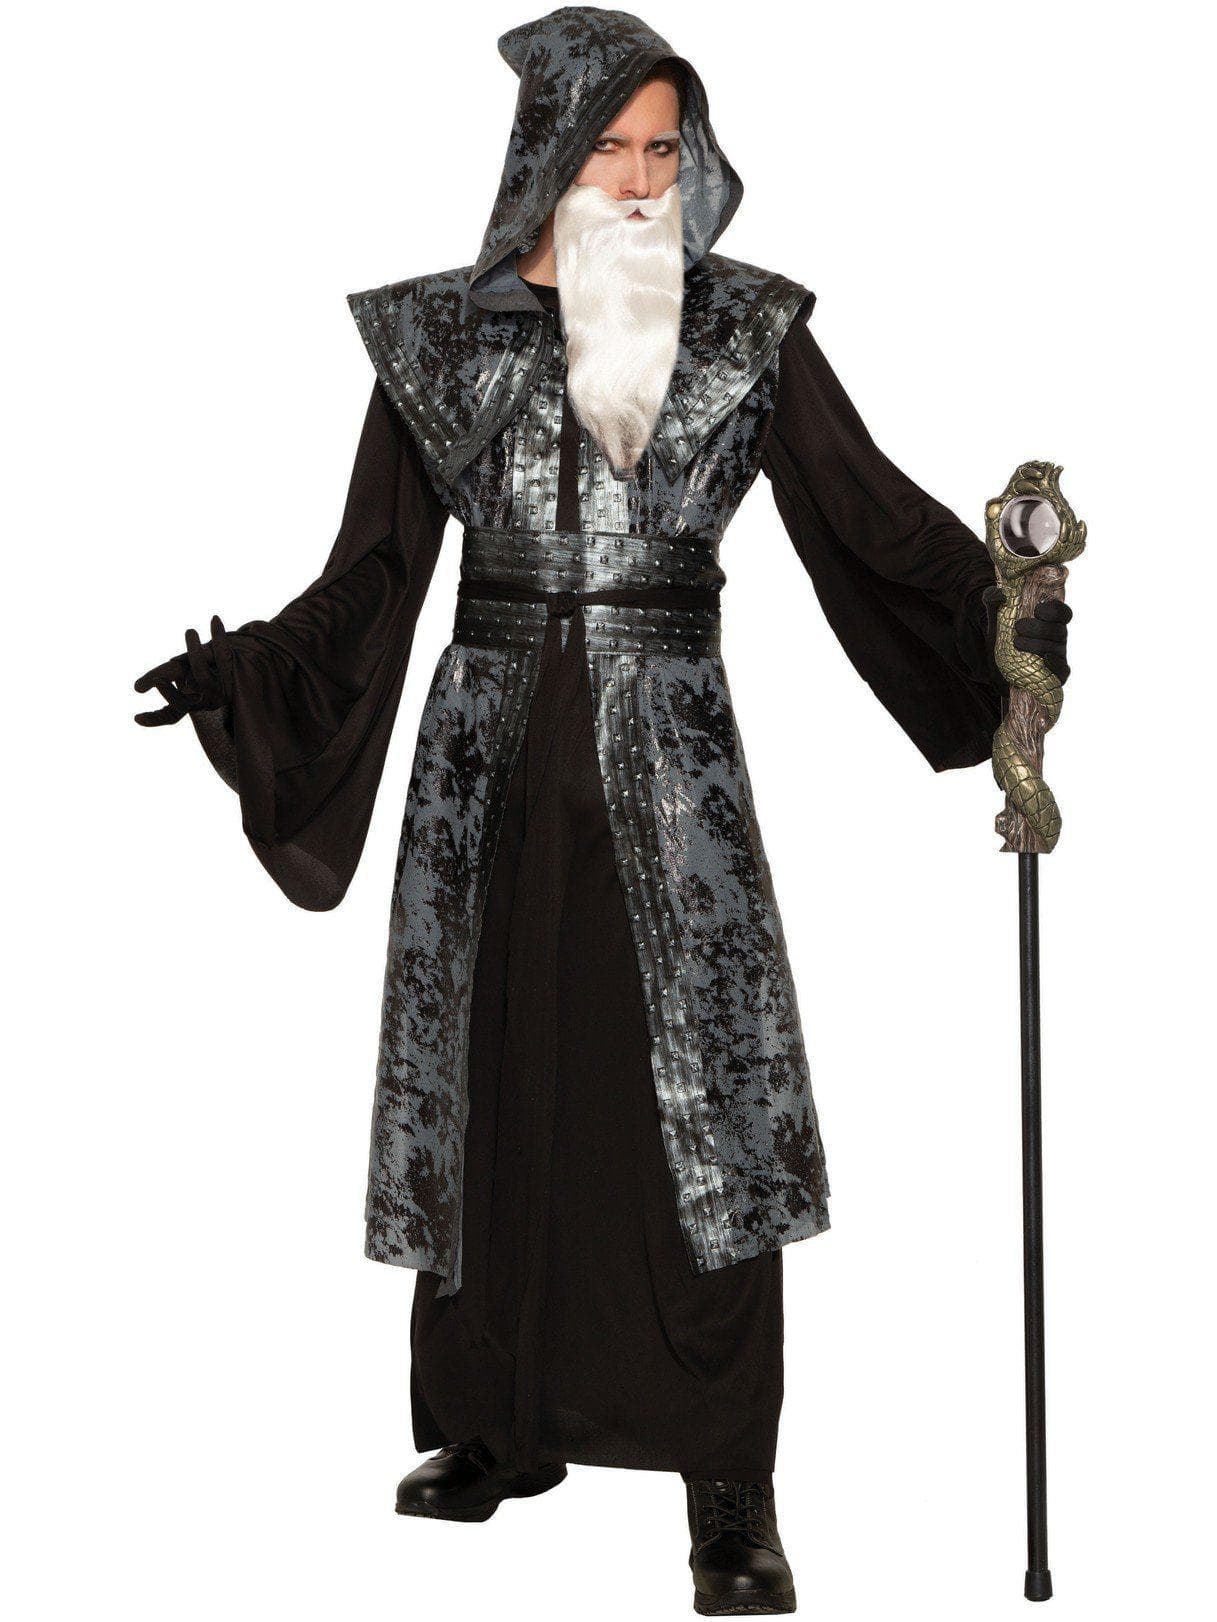 Adult Wicked Wizard Costume - costumes.com